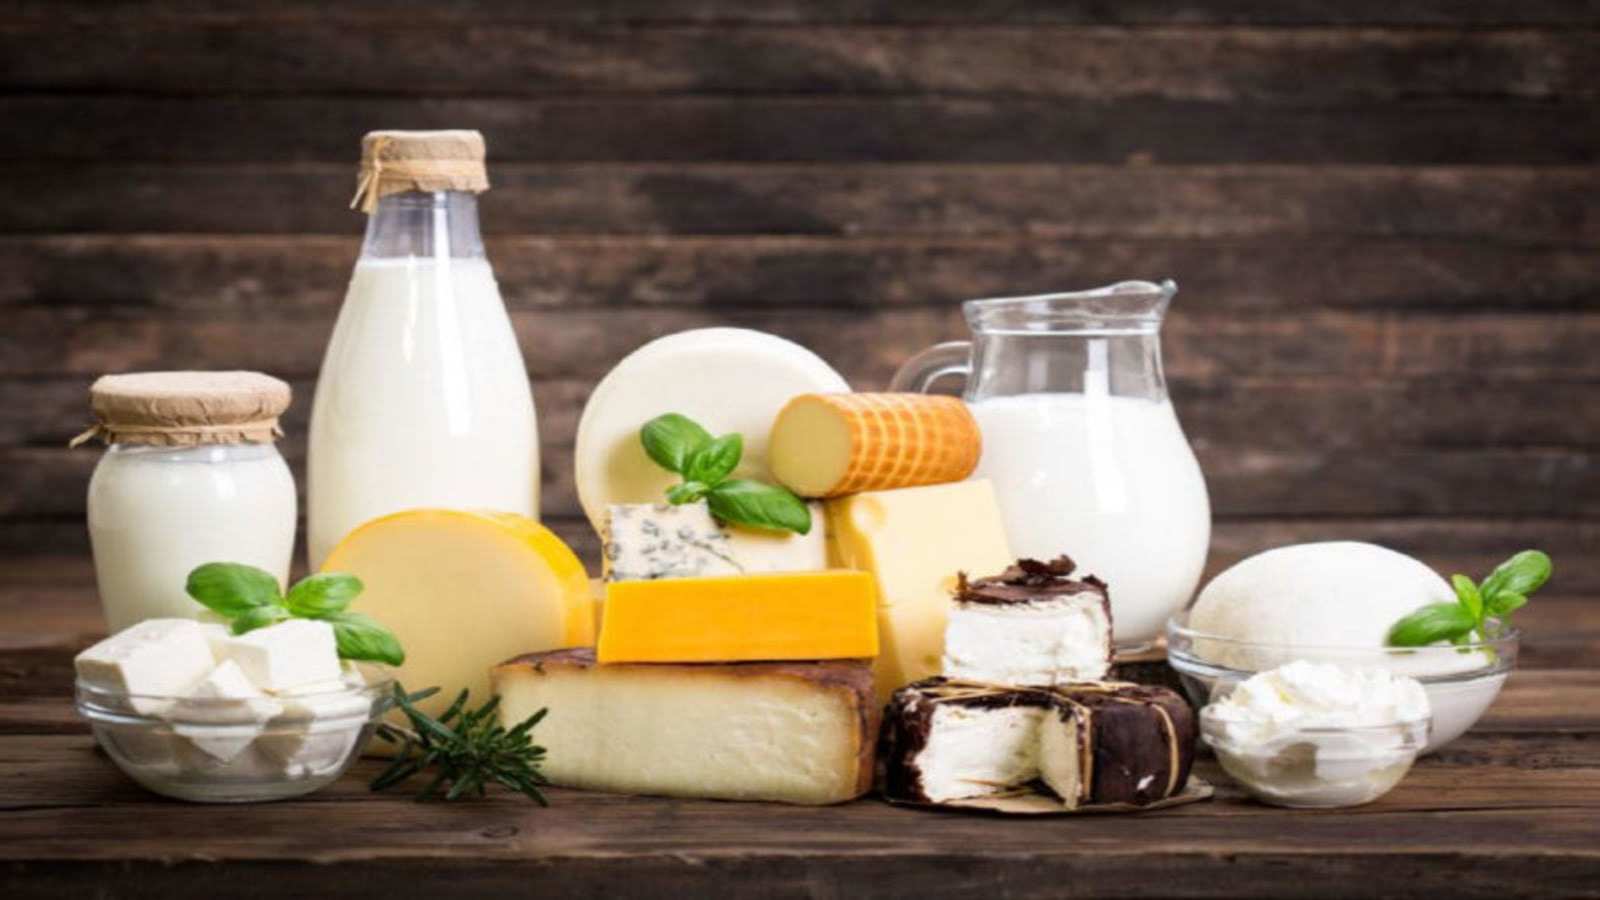 US Dairy Export Council CEO highlights global landscape for dairy alternatives, traditional dairy